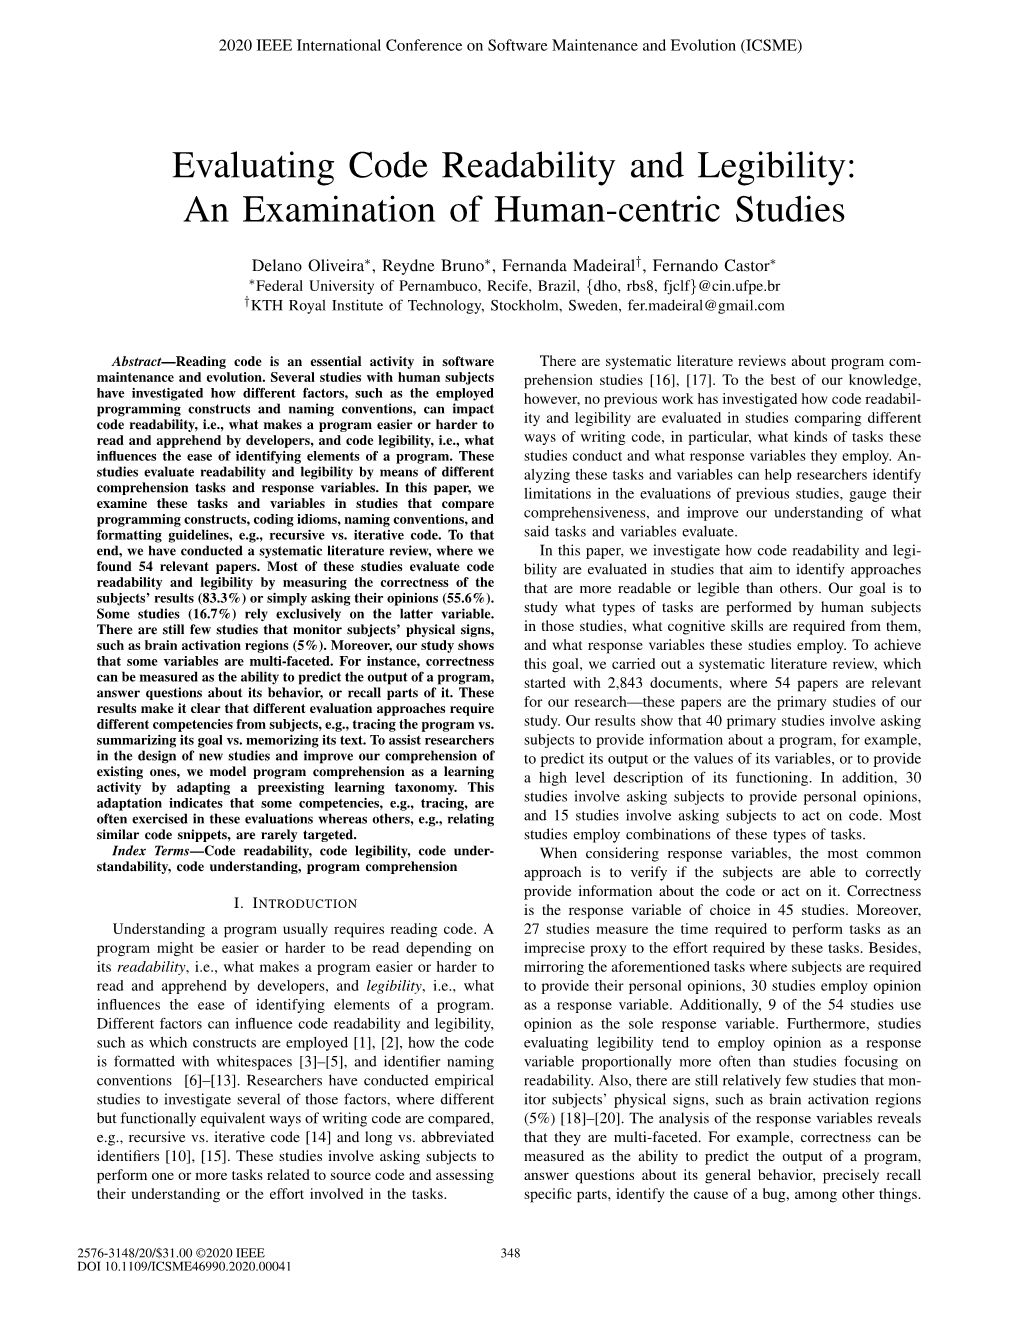 Evaluating Code Readability and Legibility: an Examination of Human-Centric Studies